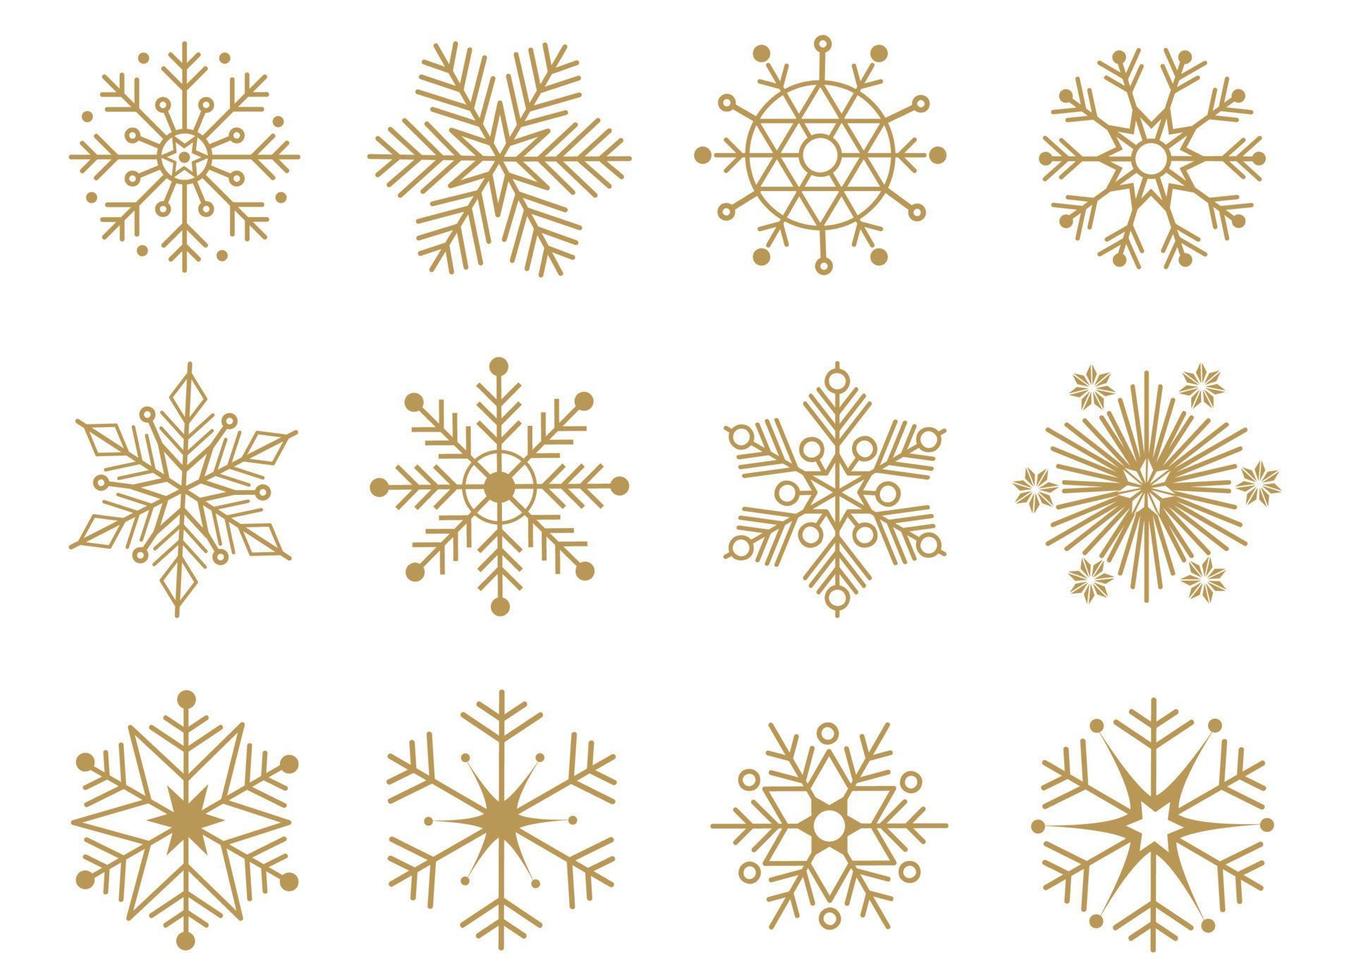 Snowflake icons set. Editable vector pictogram isolated on white background. Trendy contour symbols for mobile apps and website design. Premium icon pack in trendy line style